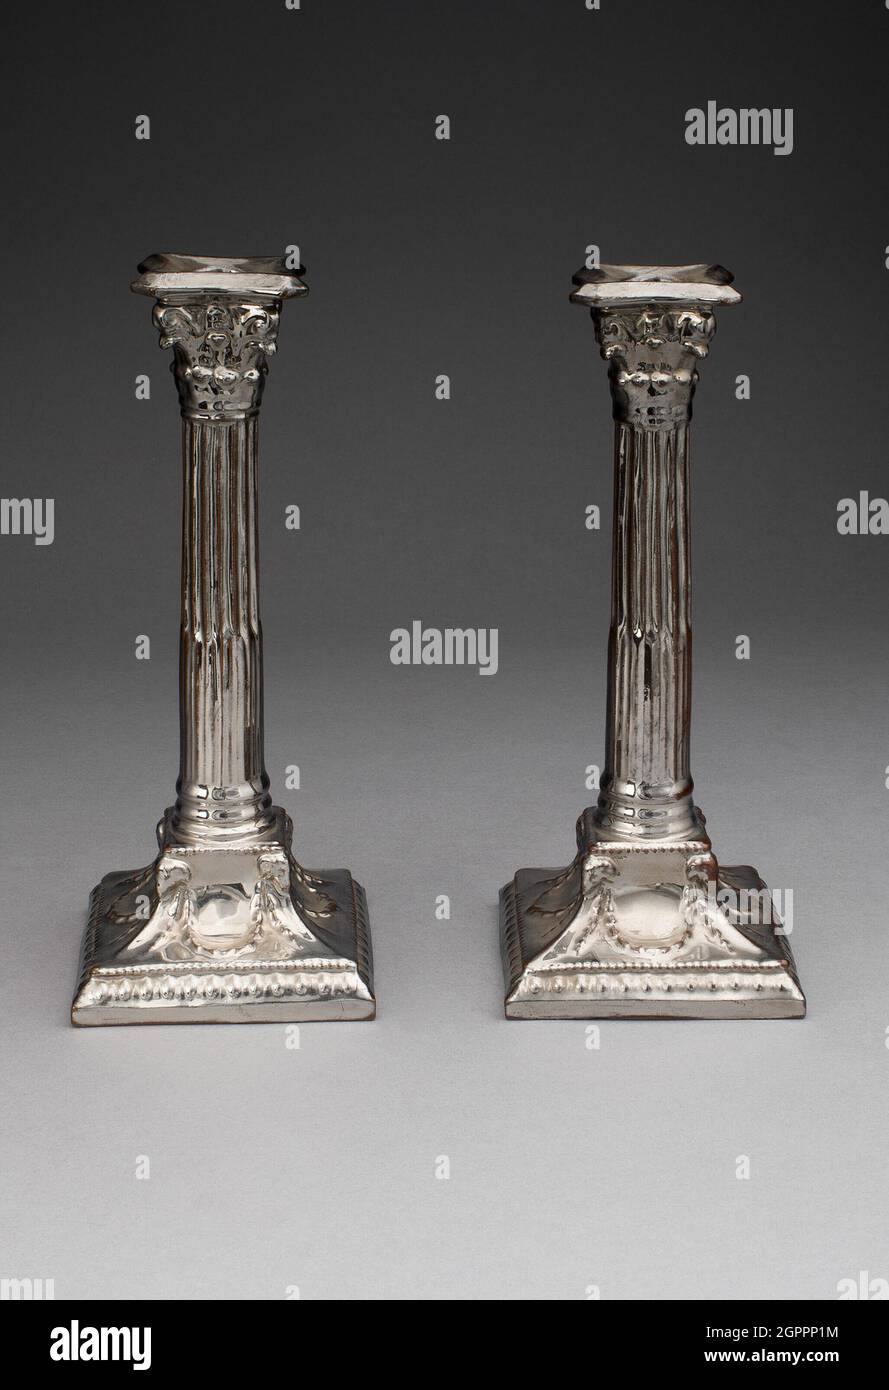 Candlestick (one of a pair), Staffordshire, 1810/20. Stock Photo